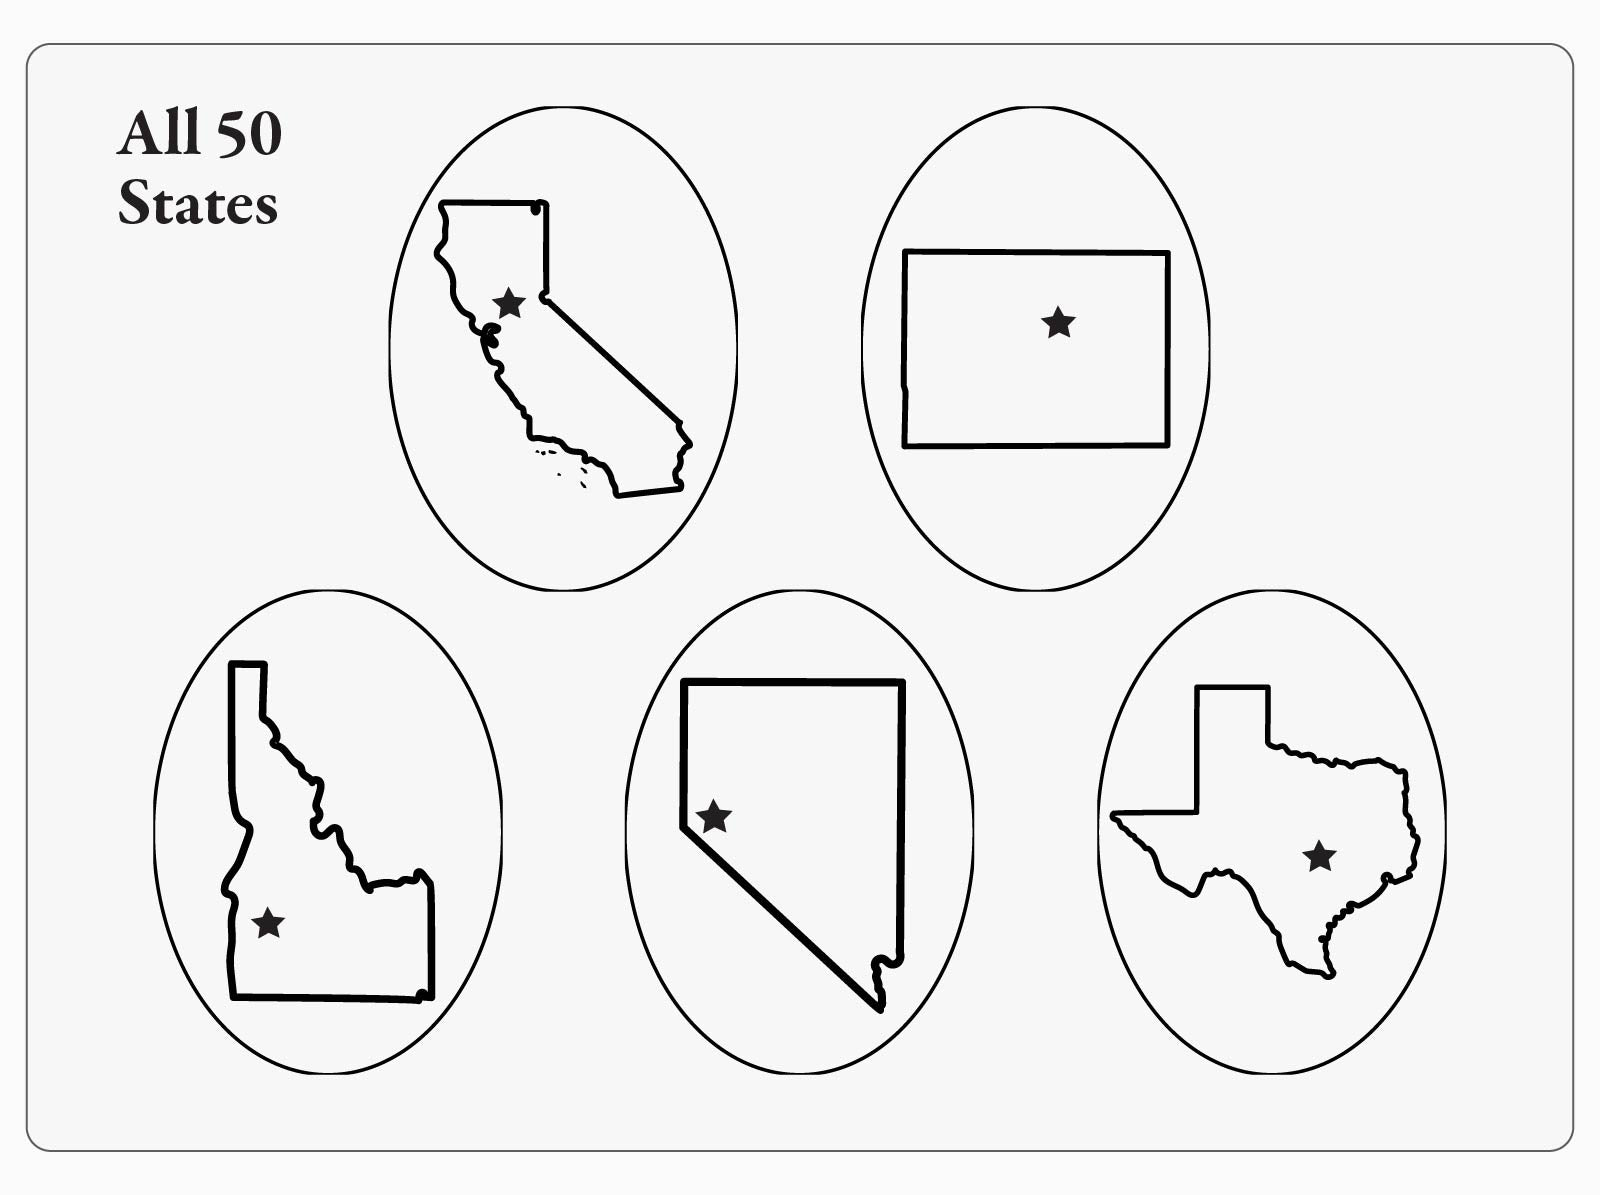 Graphic showing 5 art options with U.S. state illustrations